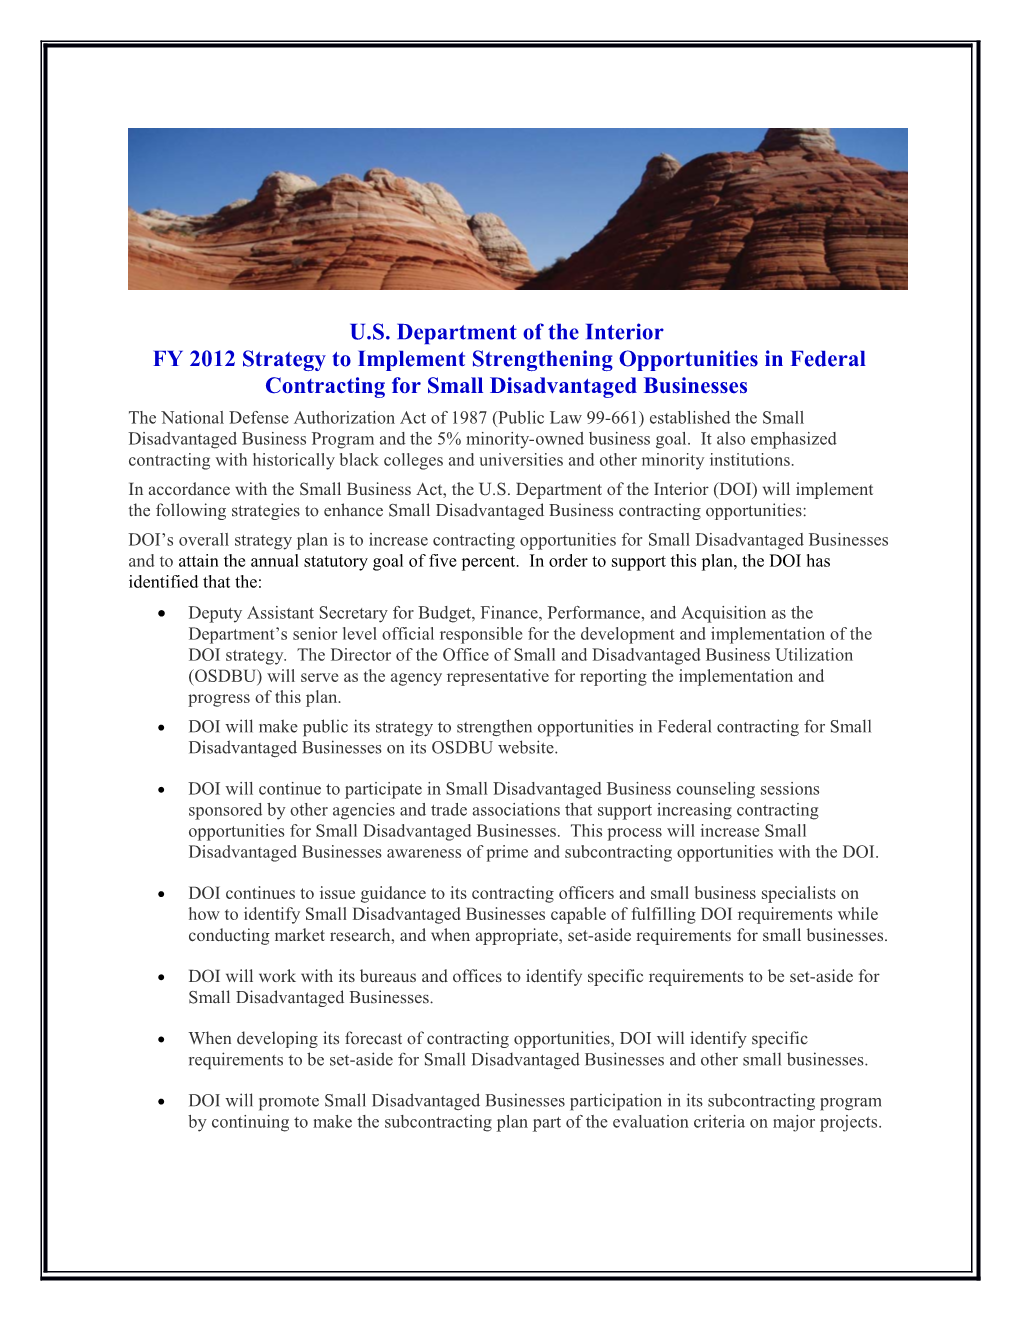 FY 2012 Strategy to Implement Strengthening Opportunities in Federal Contracting